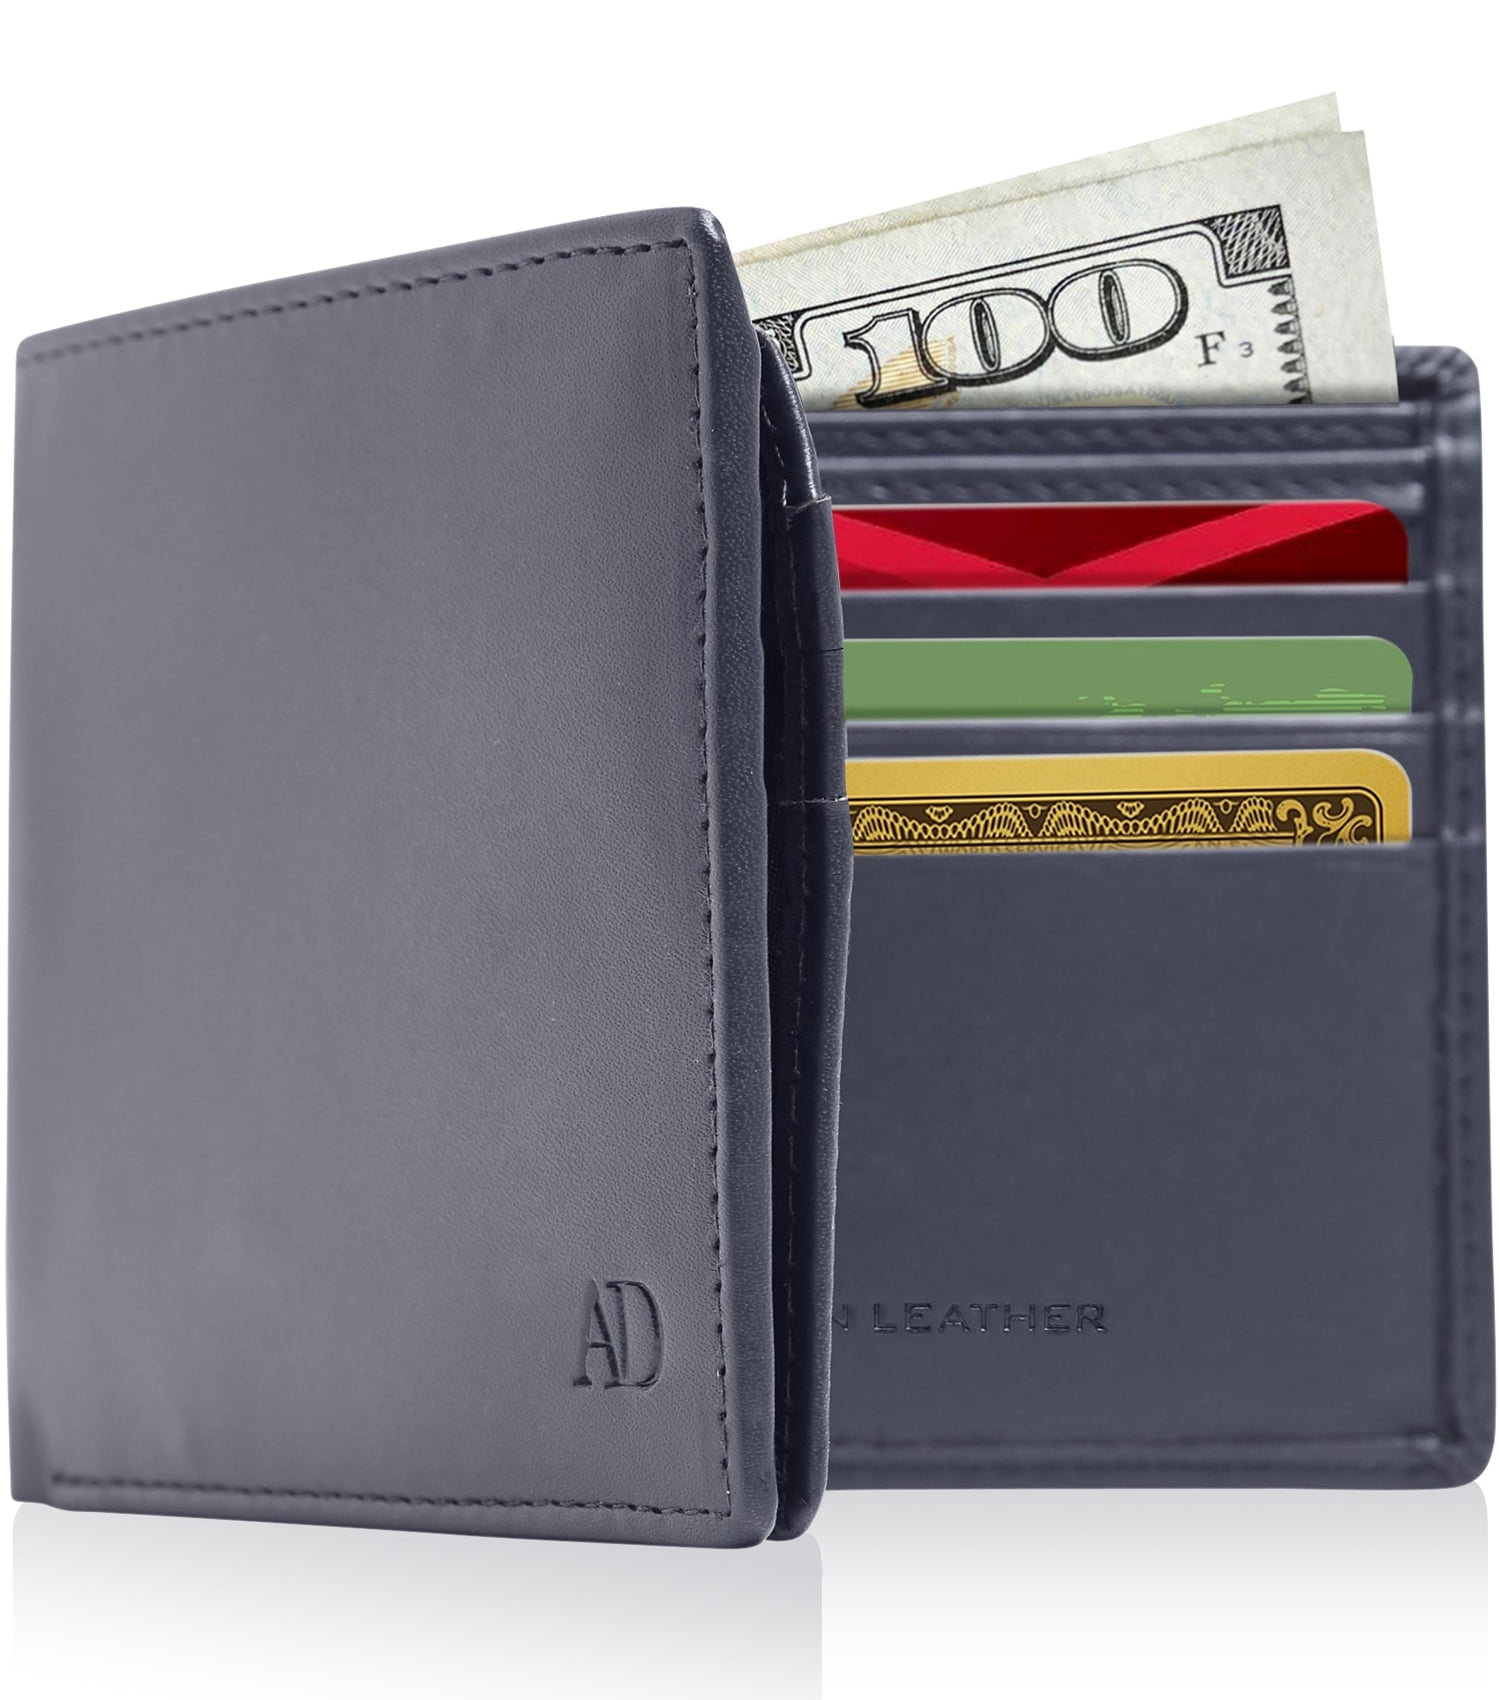 Textured Bi-Fold Wallet with Detachable Strap